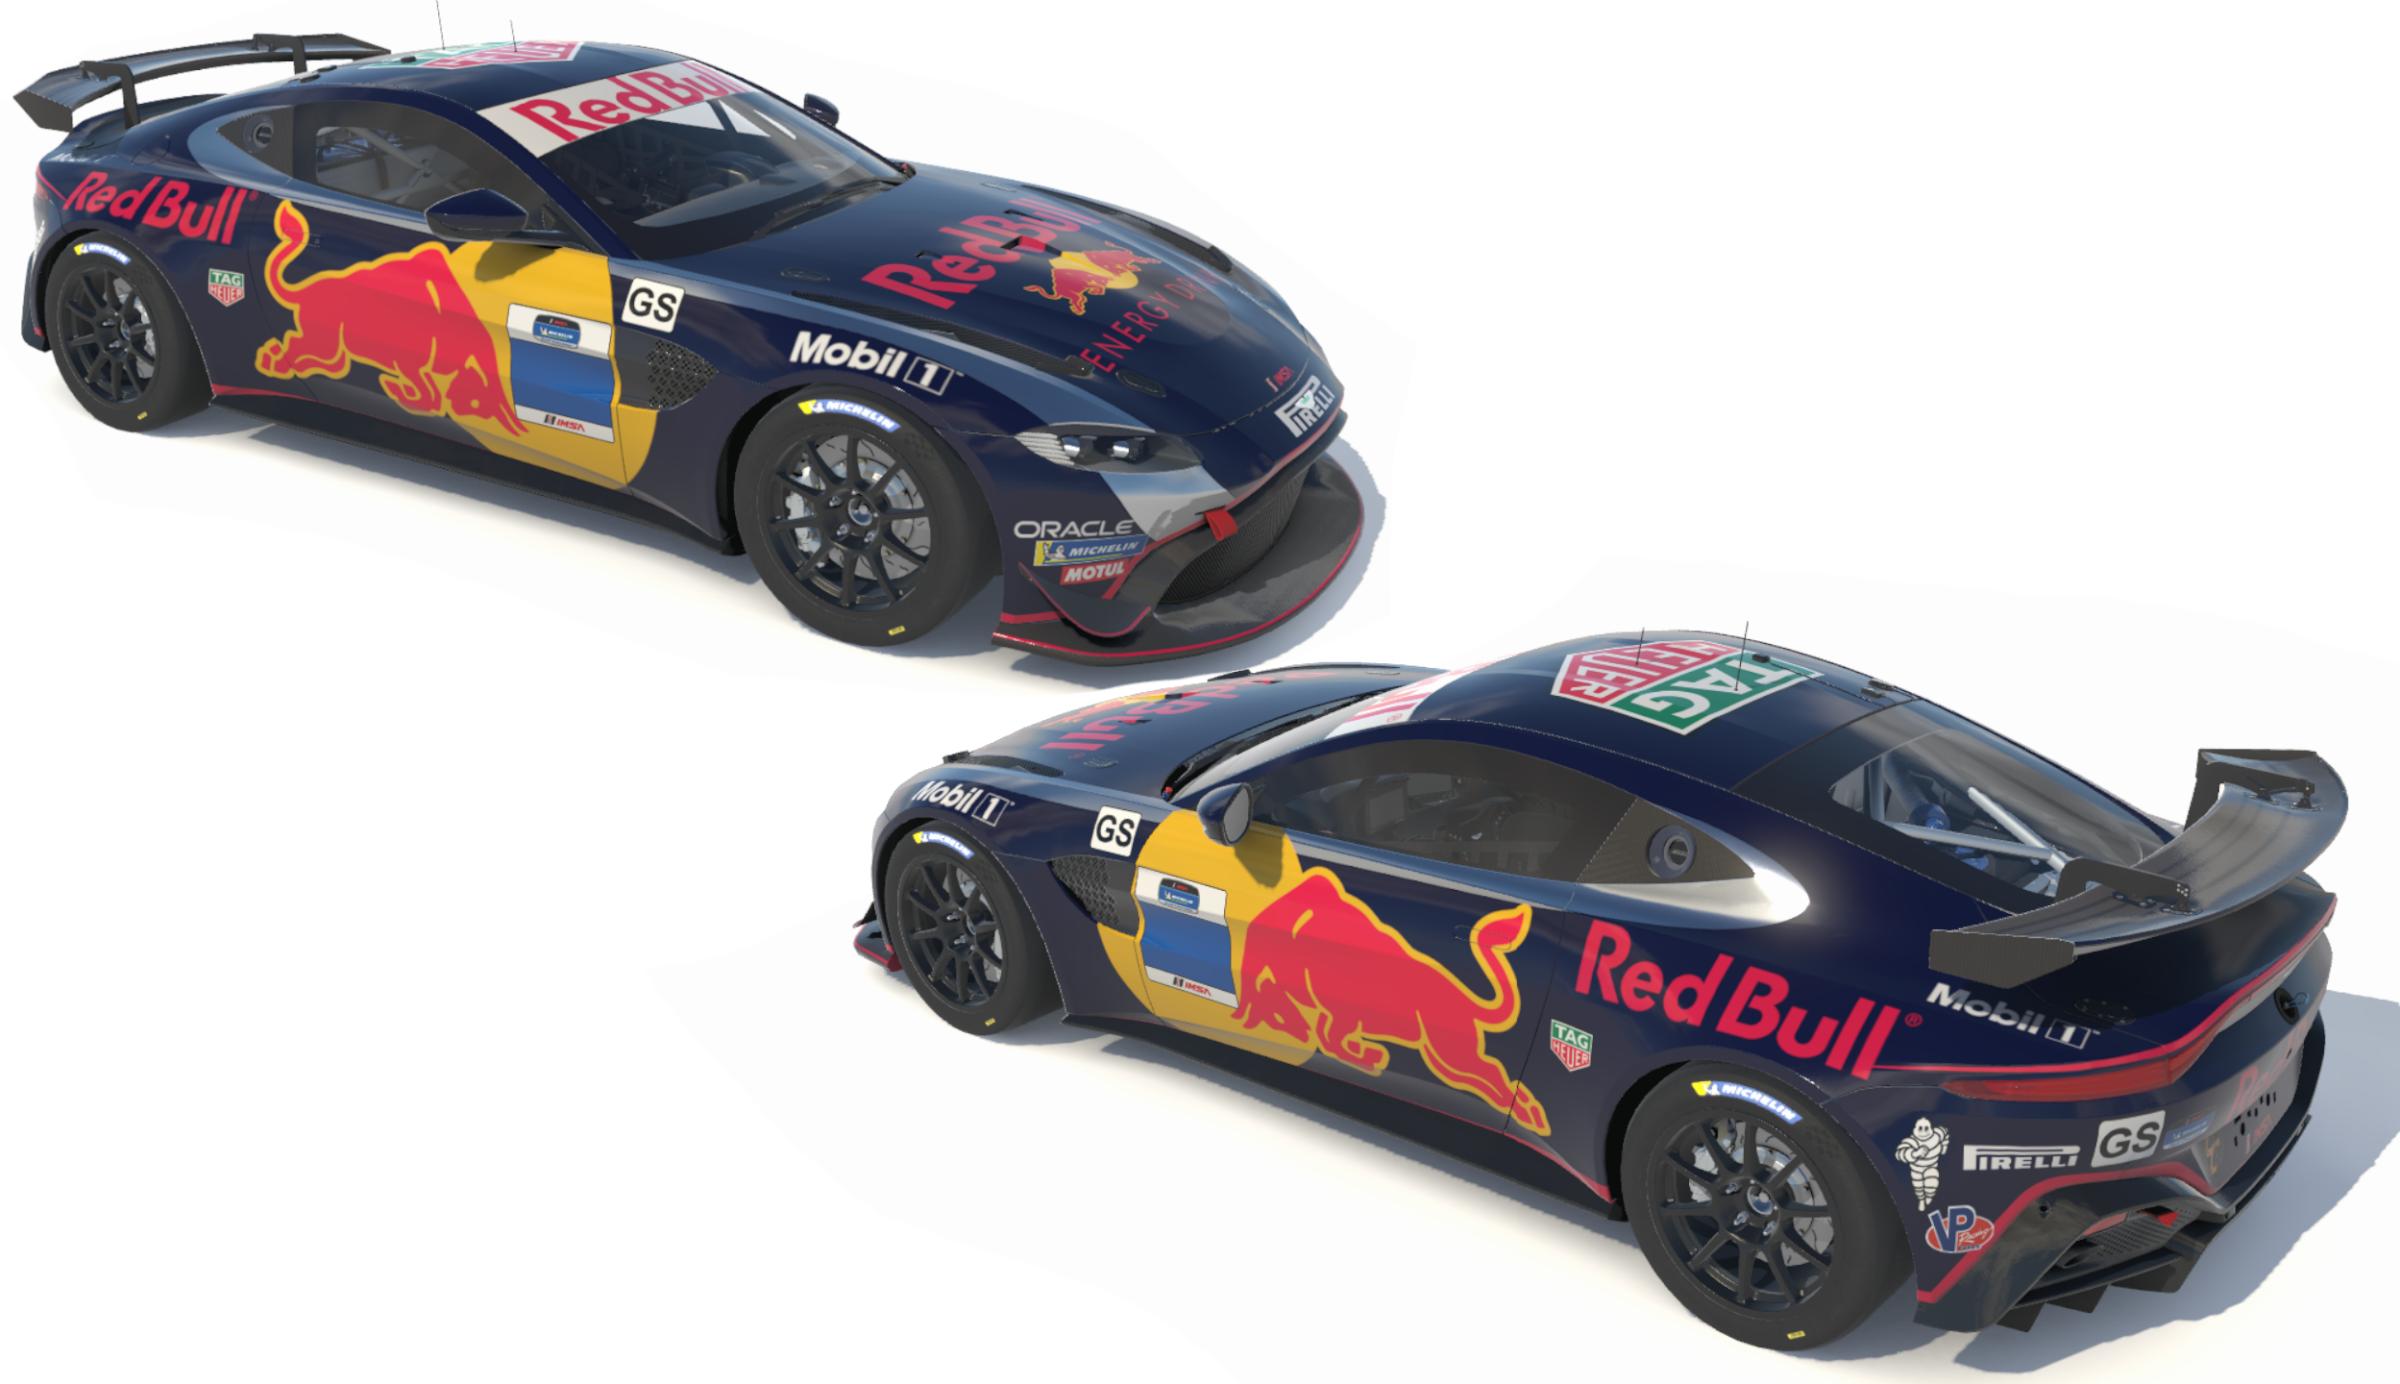 Preview of Aston Martin Vantage GT4 Redbull Racing by Alan H.